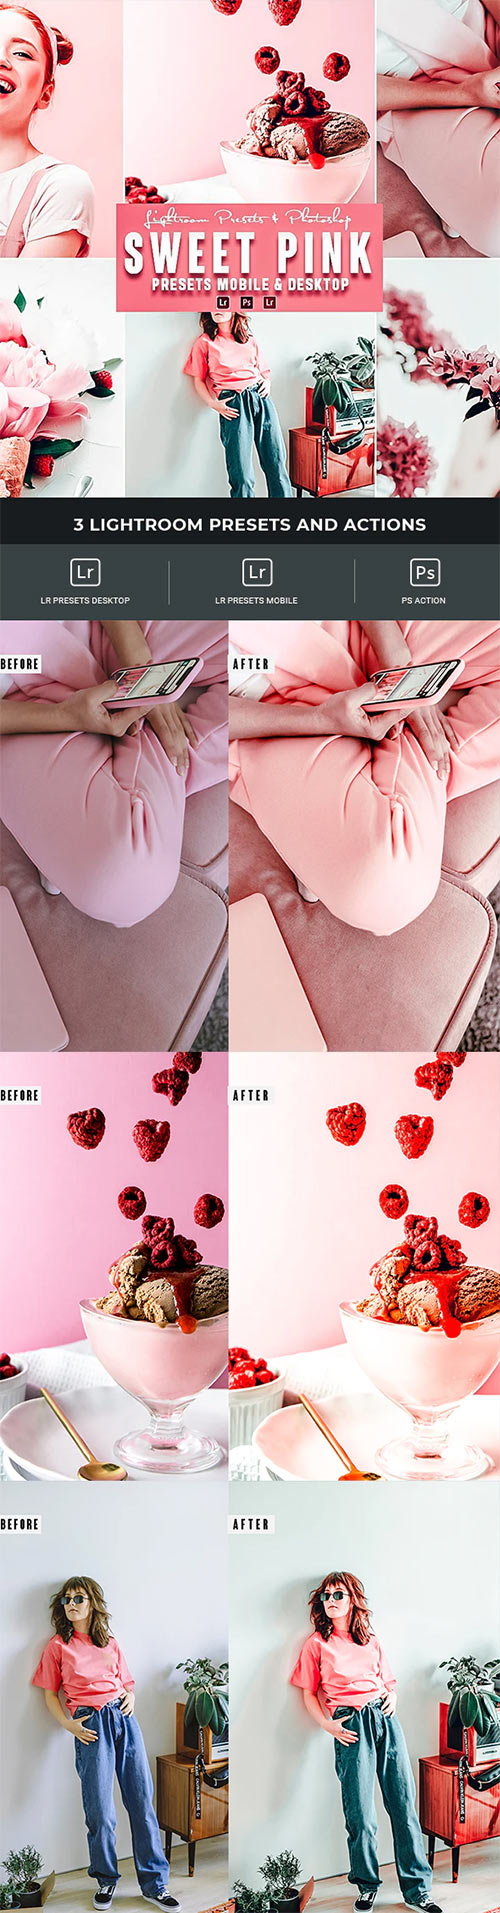 Sweet Pink Photoshop Action & Lightrom Presets 34896959